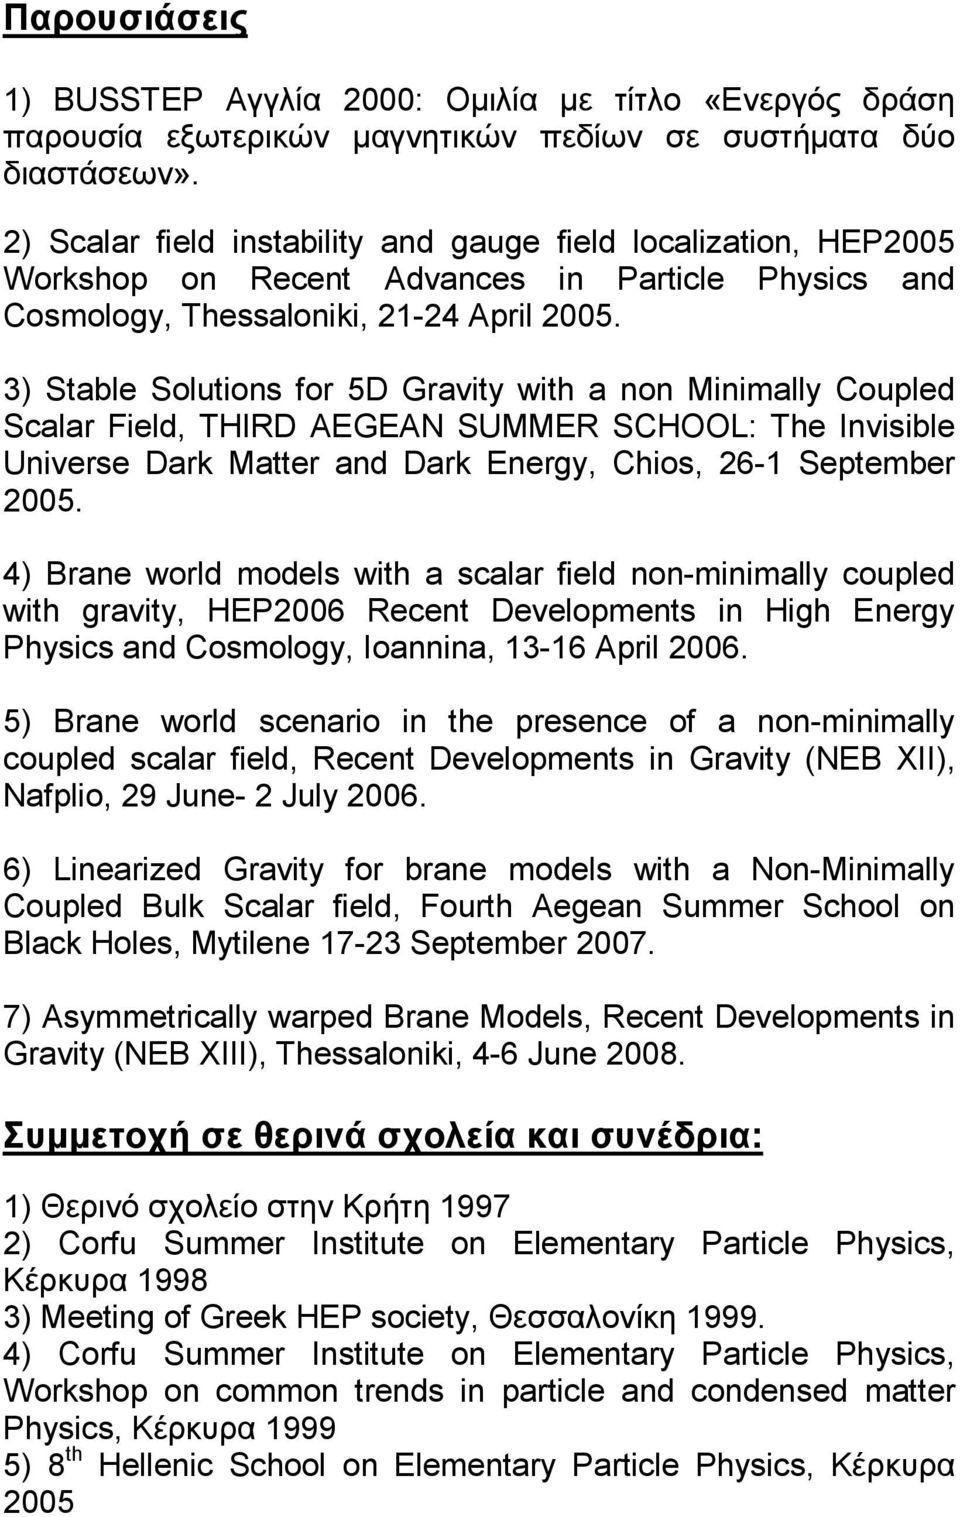 3) Stable Solutions for 5D Gravity with a non Minimally Coupled Scalar Field, THIRD AEGEAN SUMMER SCHOOL: The Invisible Universe Dark Matter and Dark Energy, Chios, 26-1 September 2005.